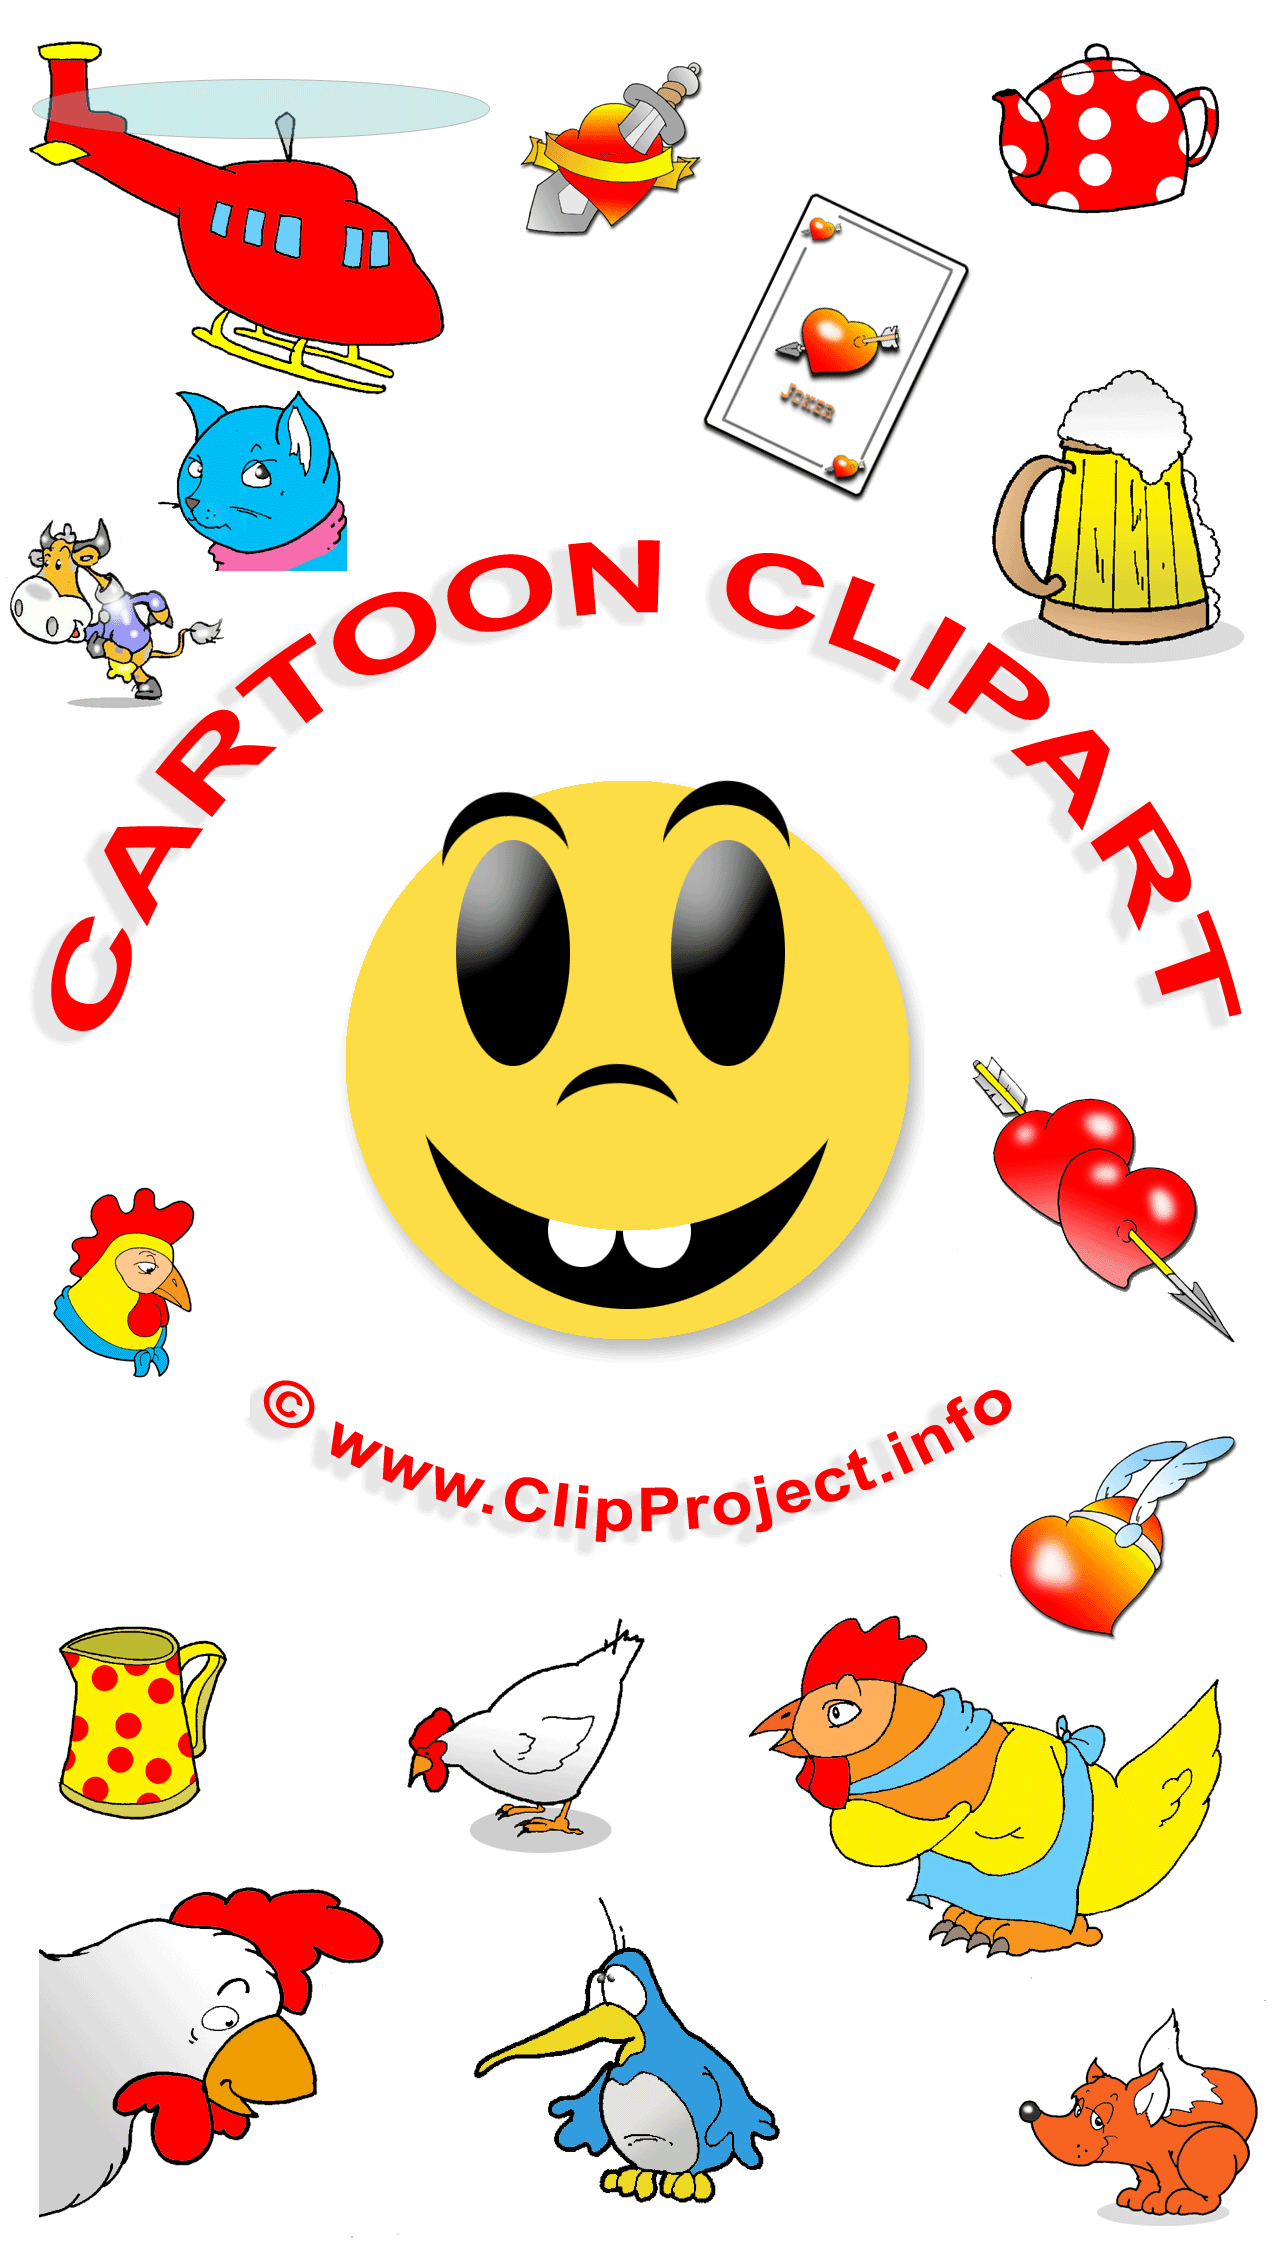 Big poster with Free Cartoon Clipart, Cliparts, Clip Art, Images, Image, Download Online free